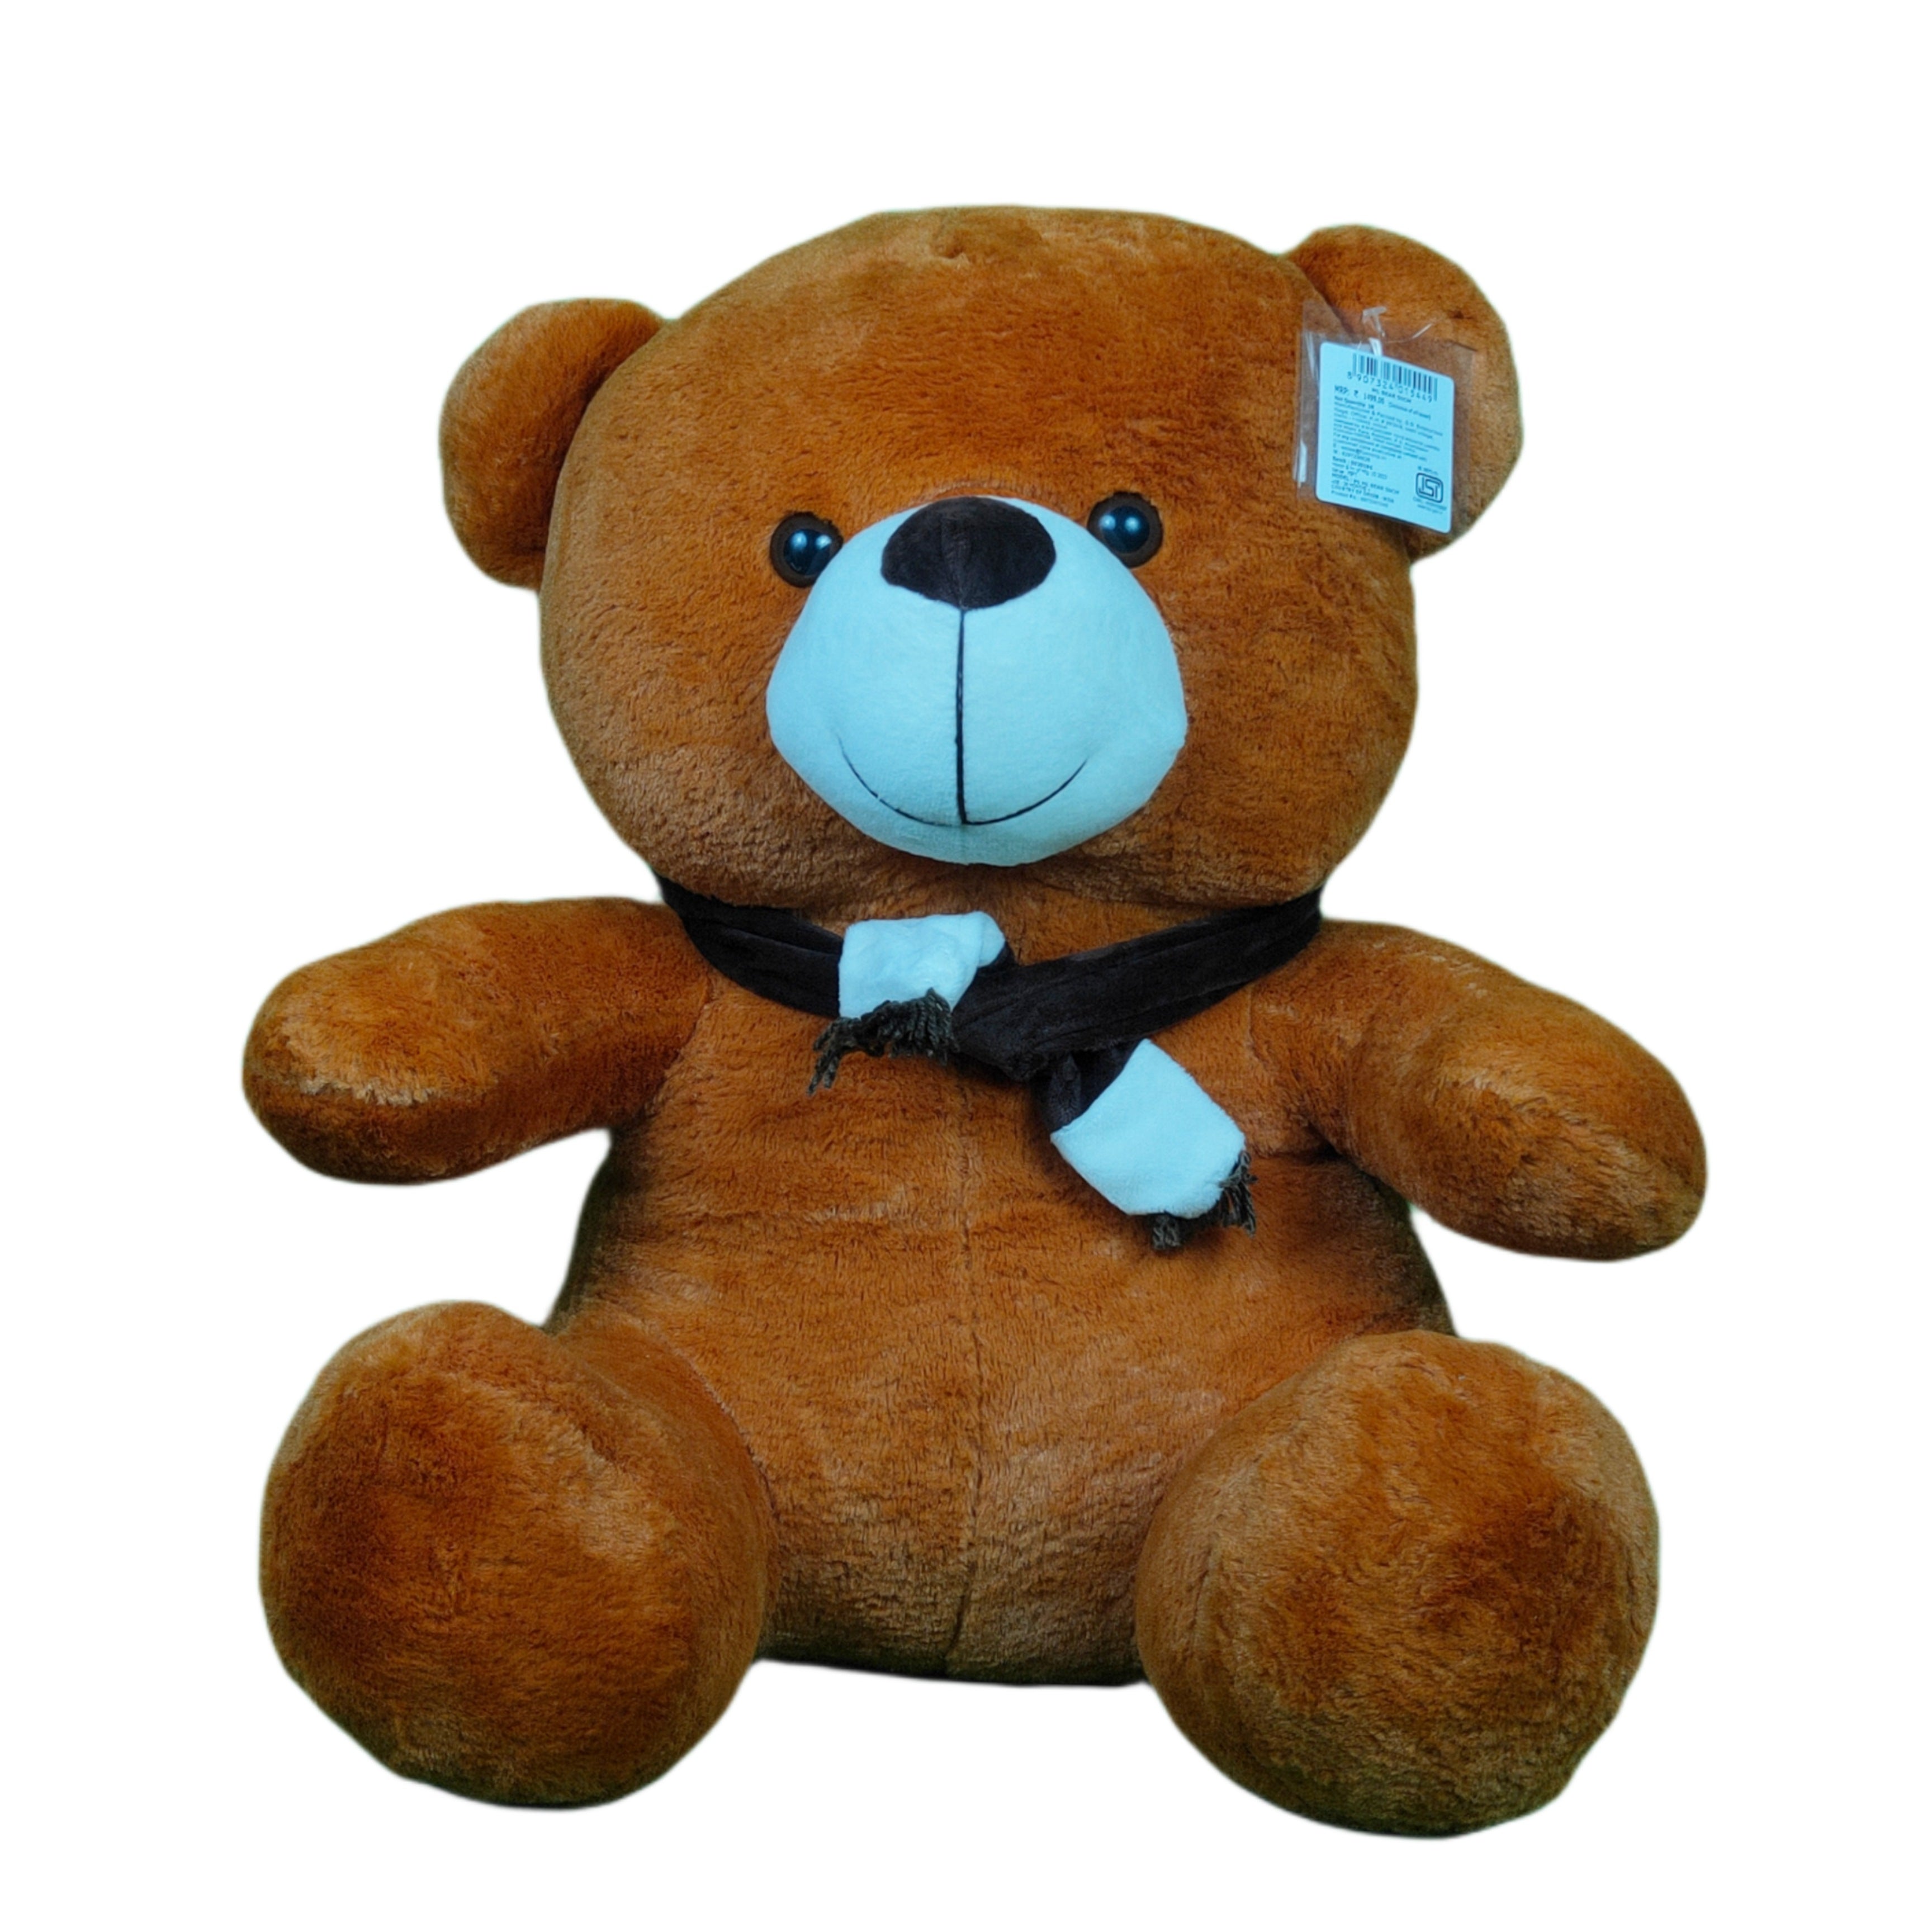 Play Hour Teddy Bear Plush Soft Toy with Muffler for Ages 3 Years and Up - Brown, 50cm